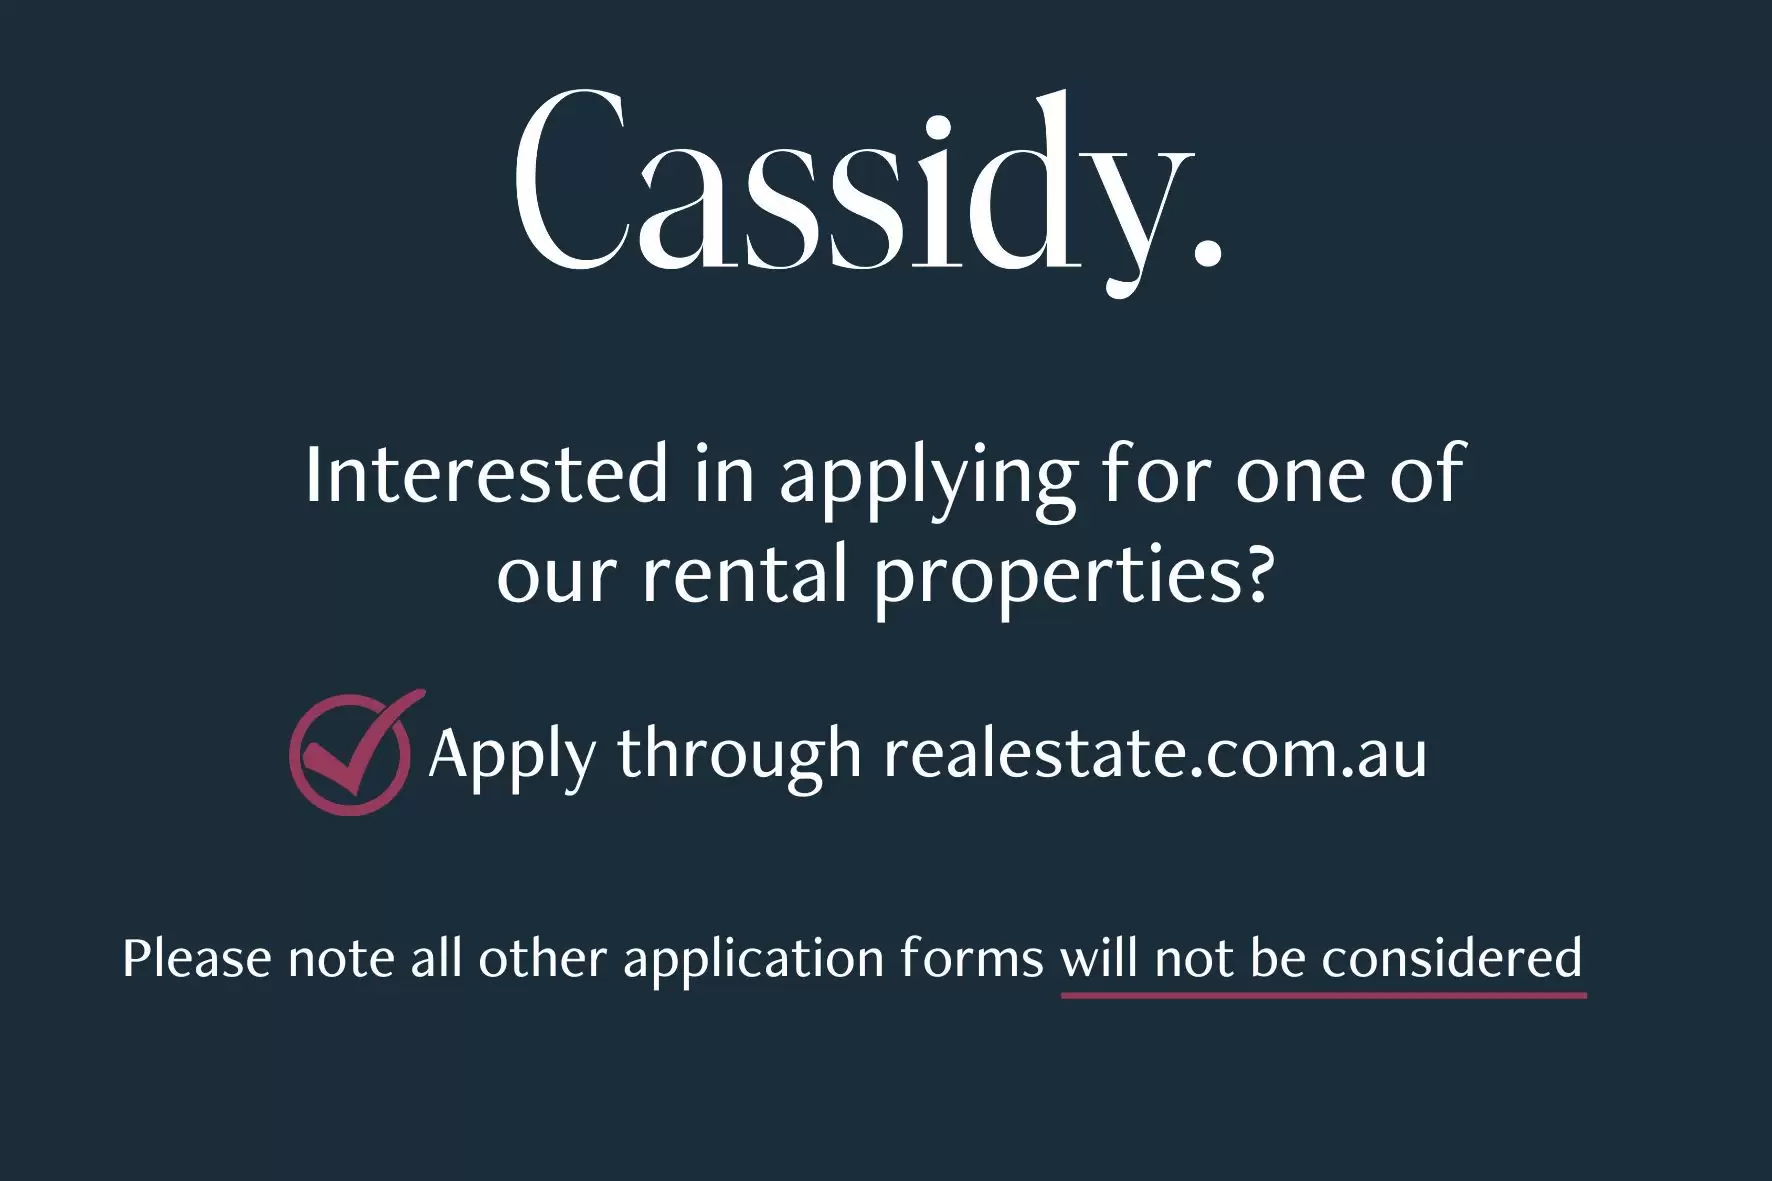 19/13-15 Farm Street, Gladesville For Lease by Cassidy Real Estate - image 1